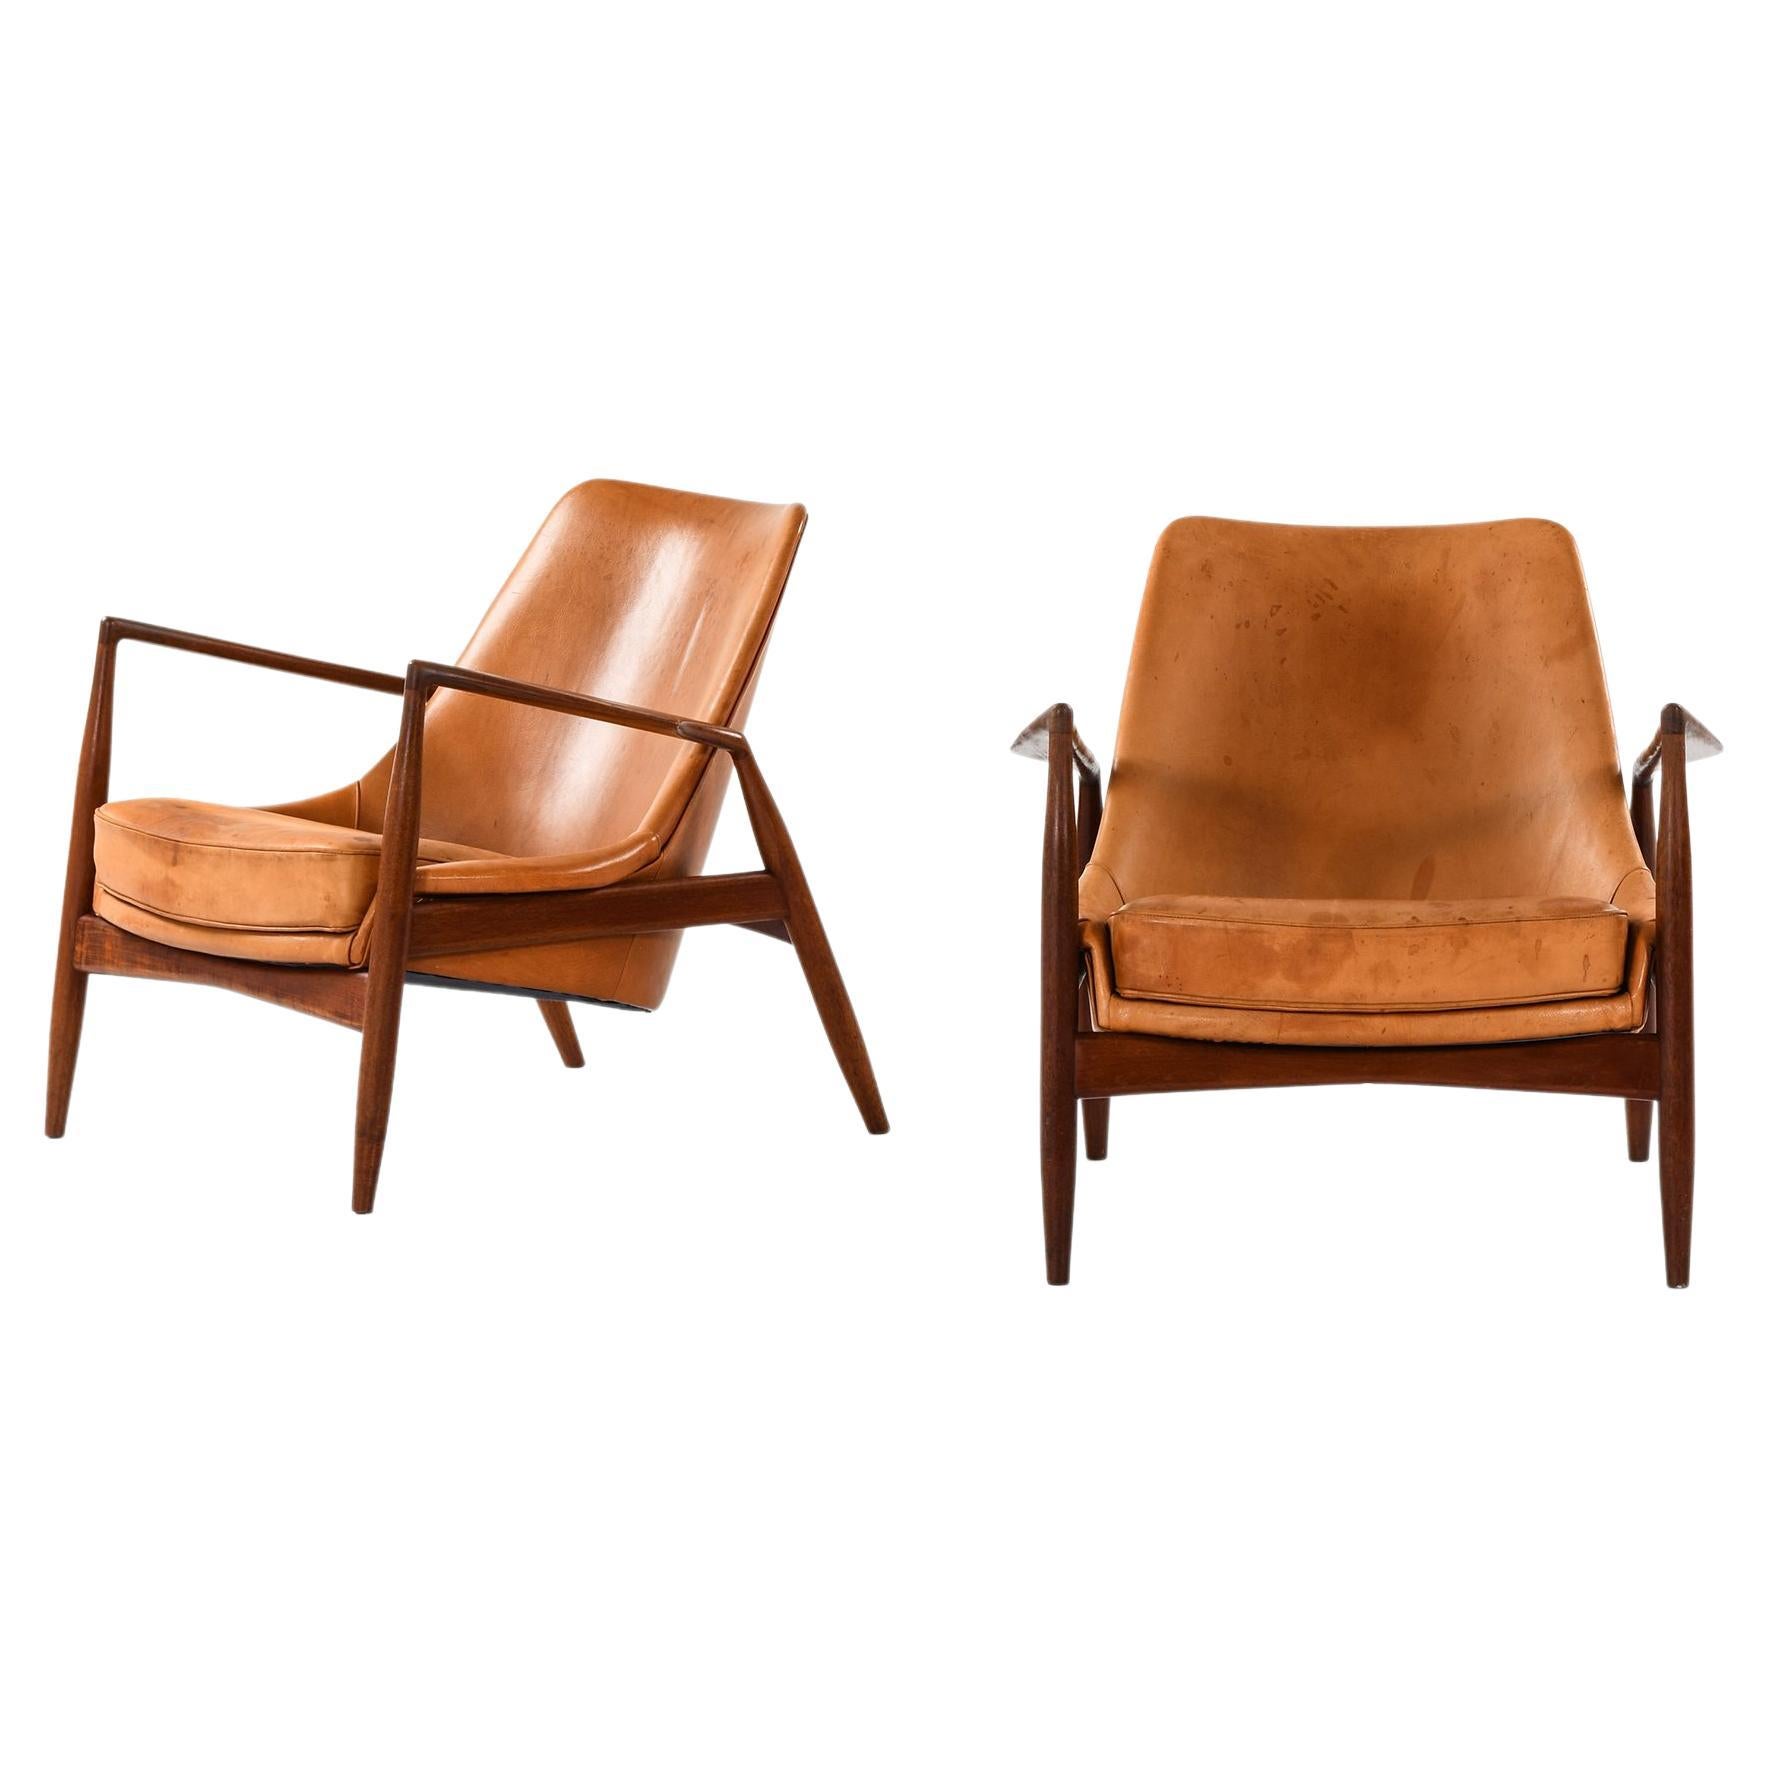 Pair of Easy Chairs in Teak and Leather by Ib Kofod-Larsen, 1950s For Sale